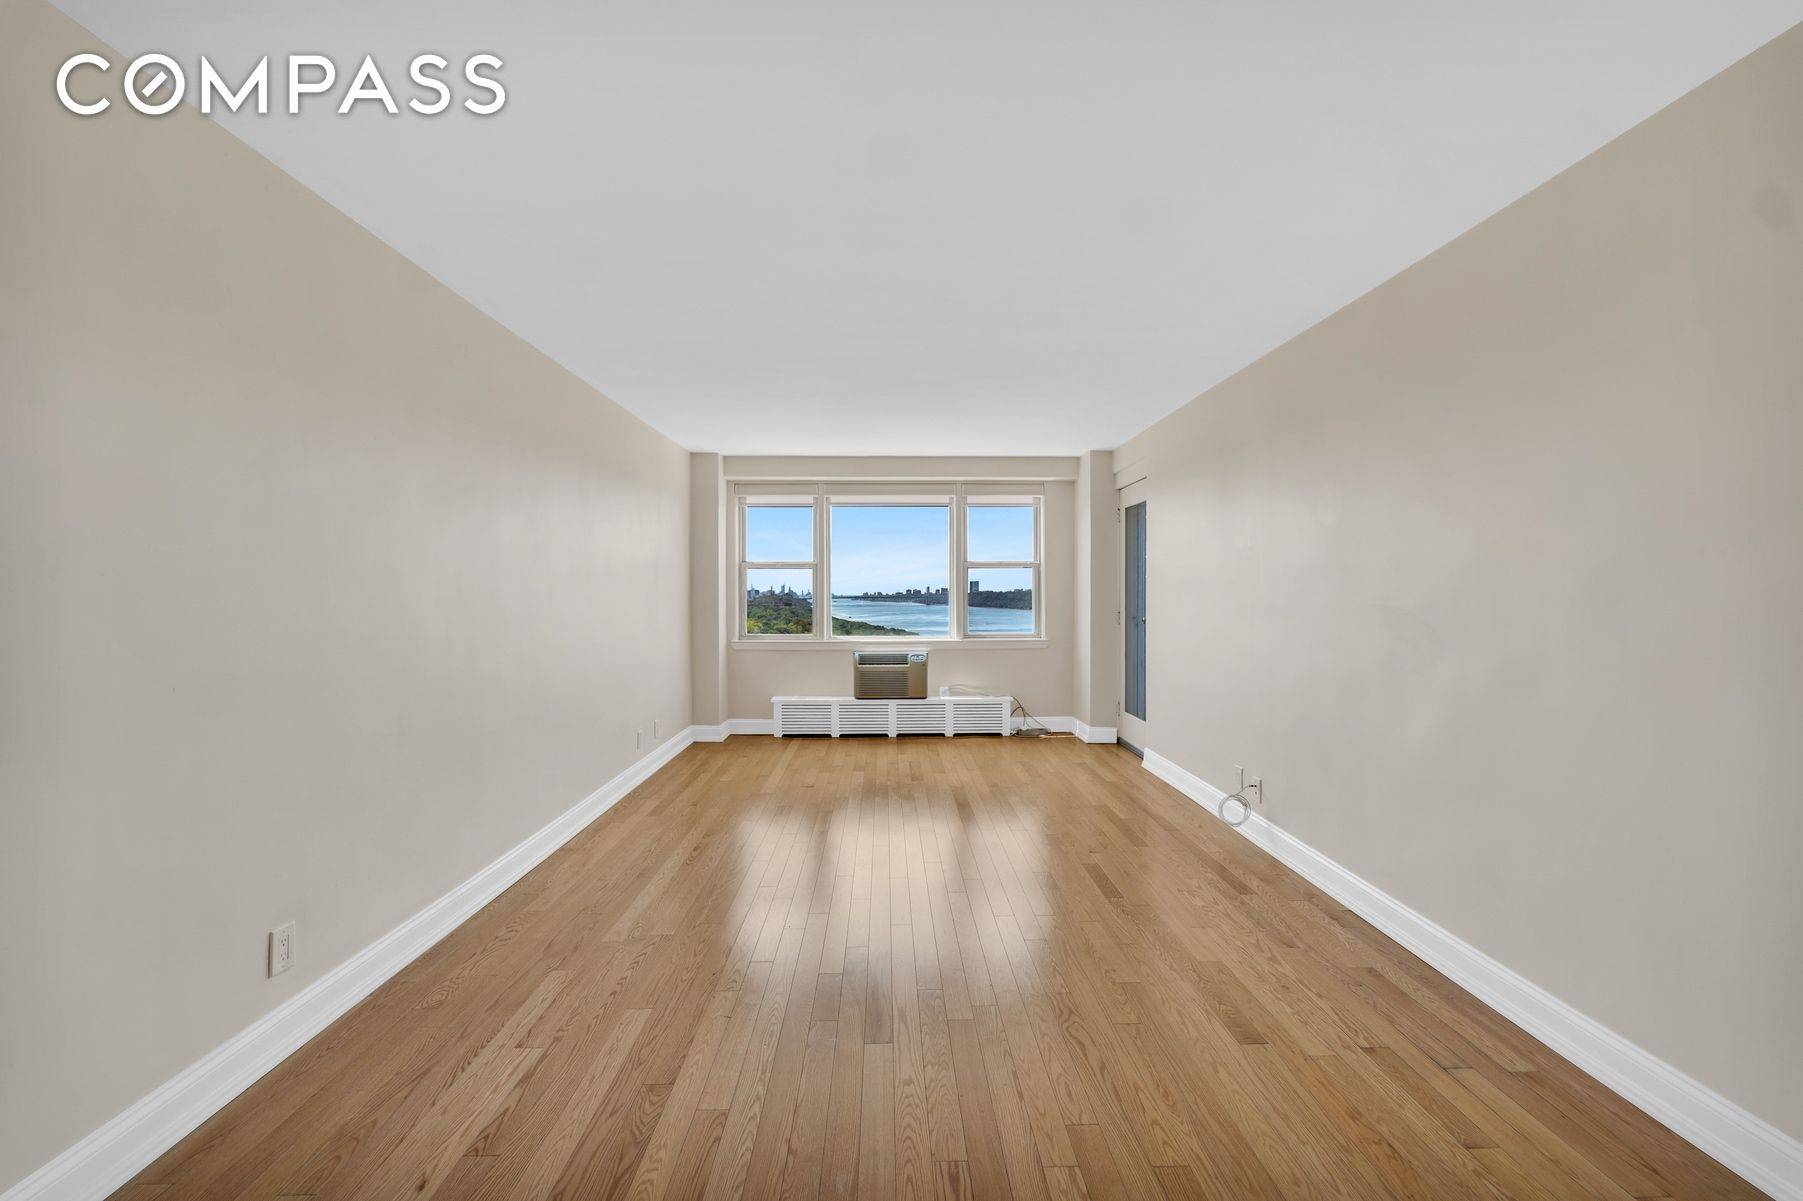 Magnificent unobstructed views of the Hudson River, GWB and Manhattan.